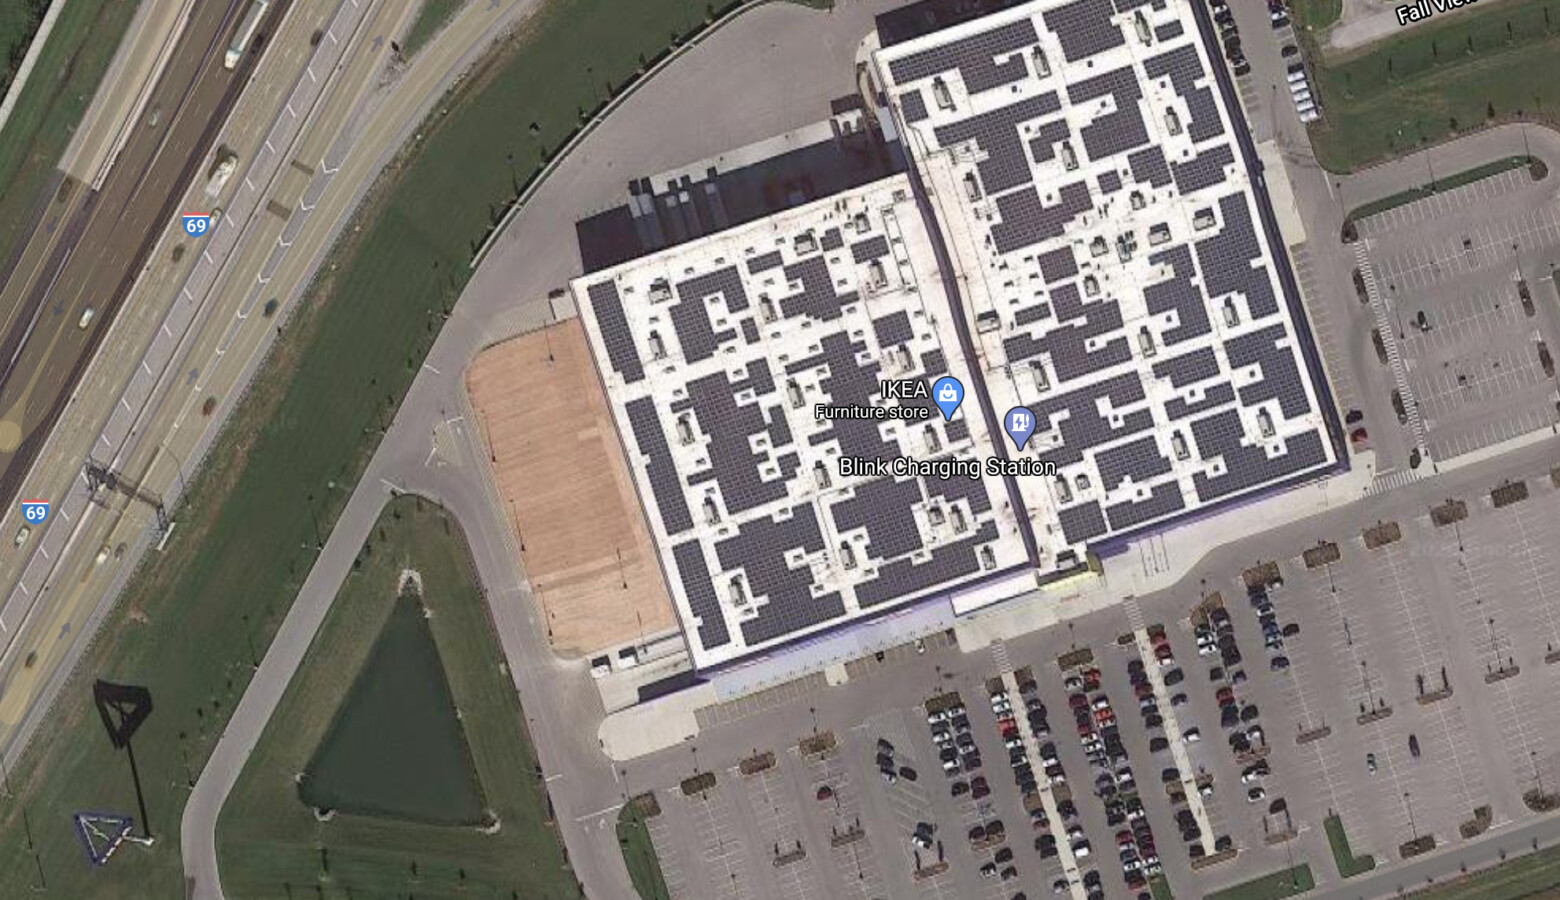 Solar panels on the roof of the IKEA furniture store in Fishers. Economic experts that spoke with the state's energy task force said more companies are looking to be located in states that can help them meet their sustainability goals. (Google Maps)